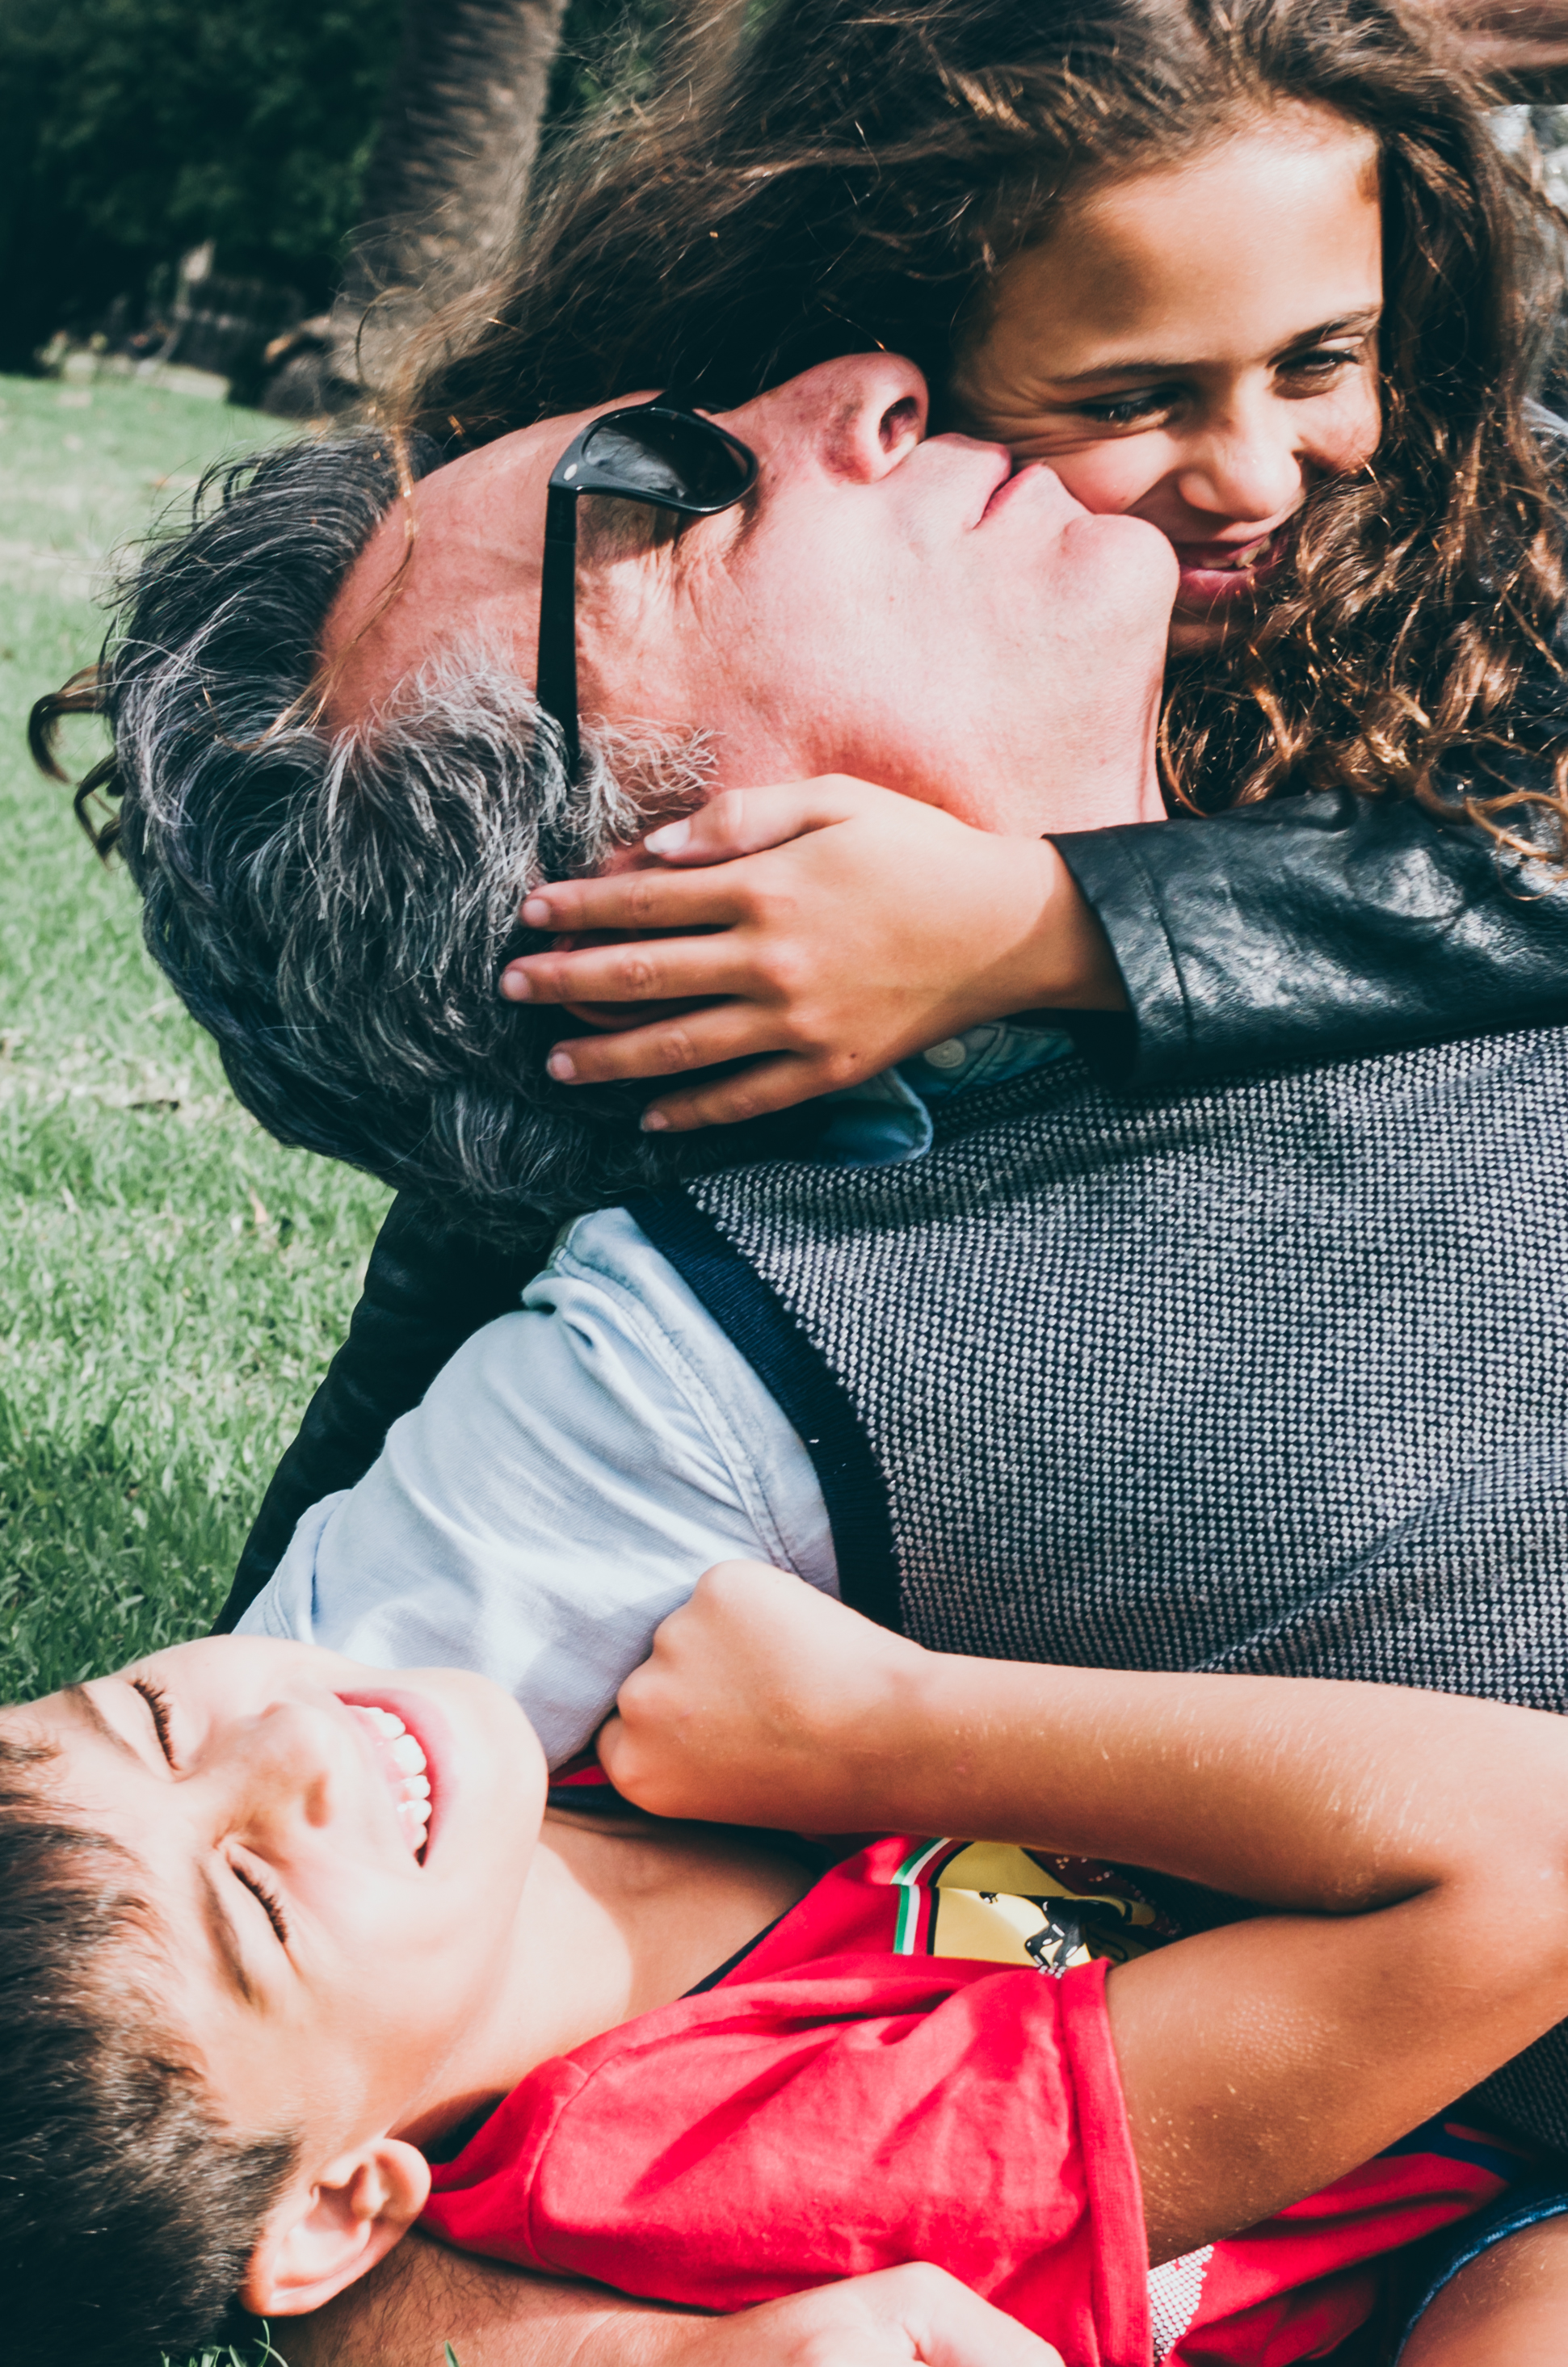 Lifestyle family photographer Liyat G Haile documents and captures a happy father and daughter lying on grass, hugging and kissing interacting and connecting